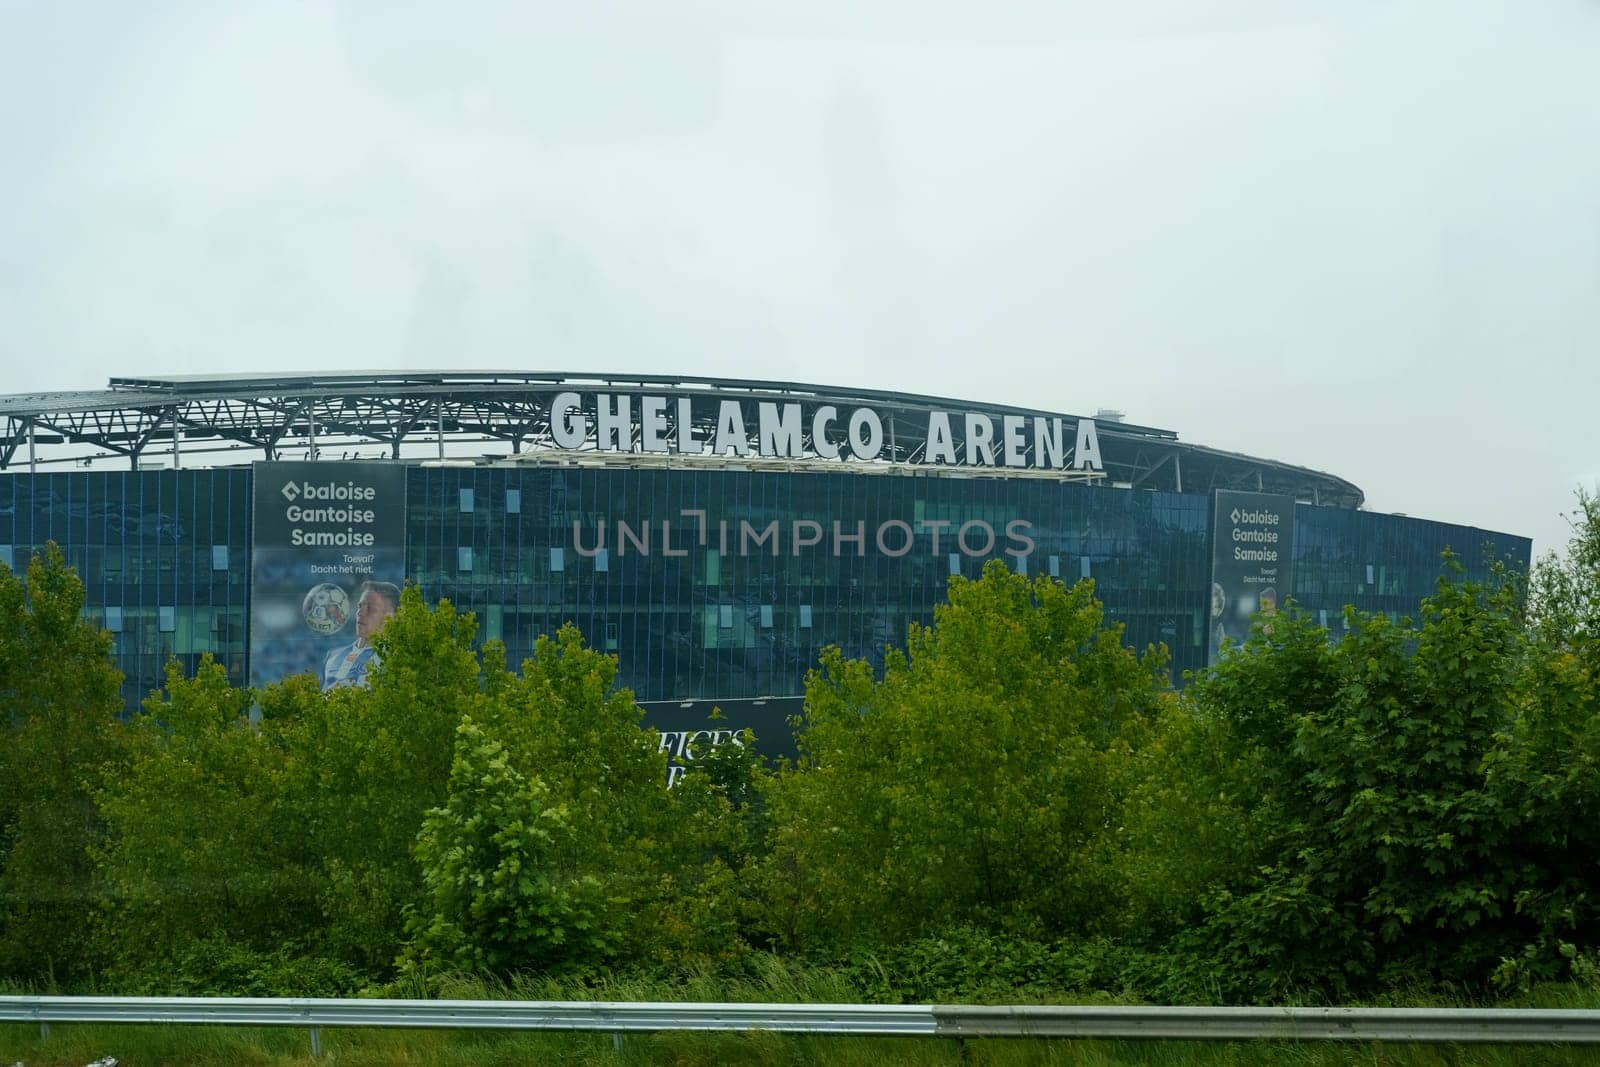 Ghelamco Arena Stadium on a Cloudy Day by Sd28DimoN_1976